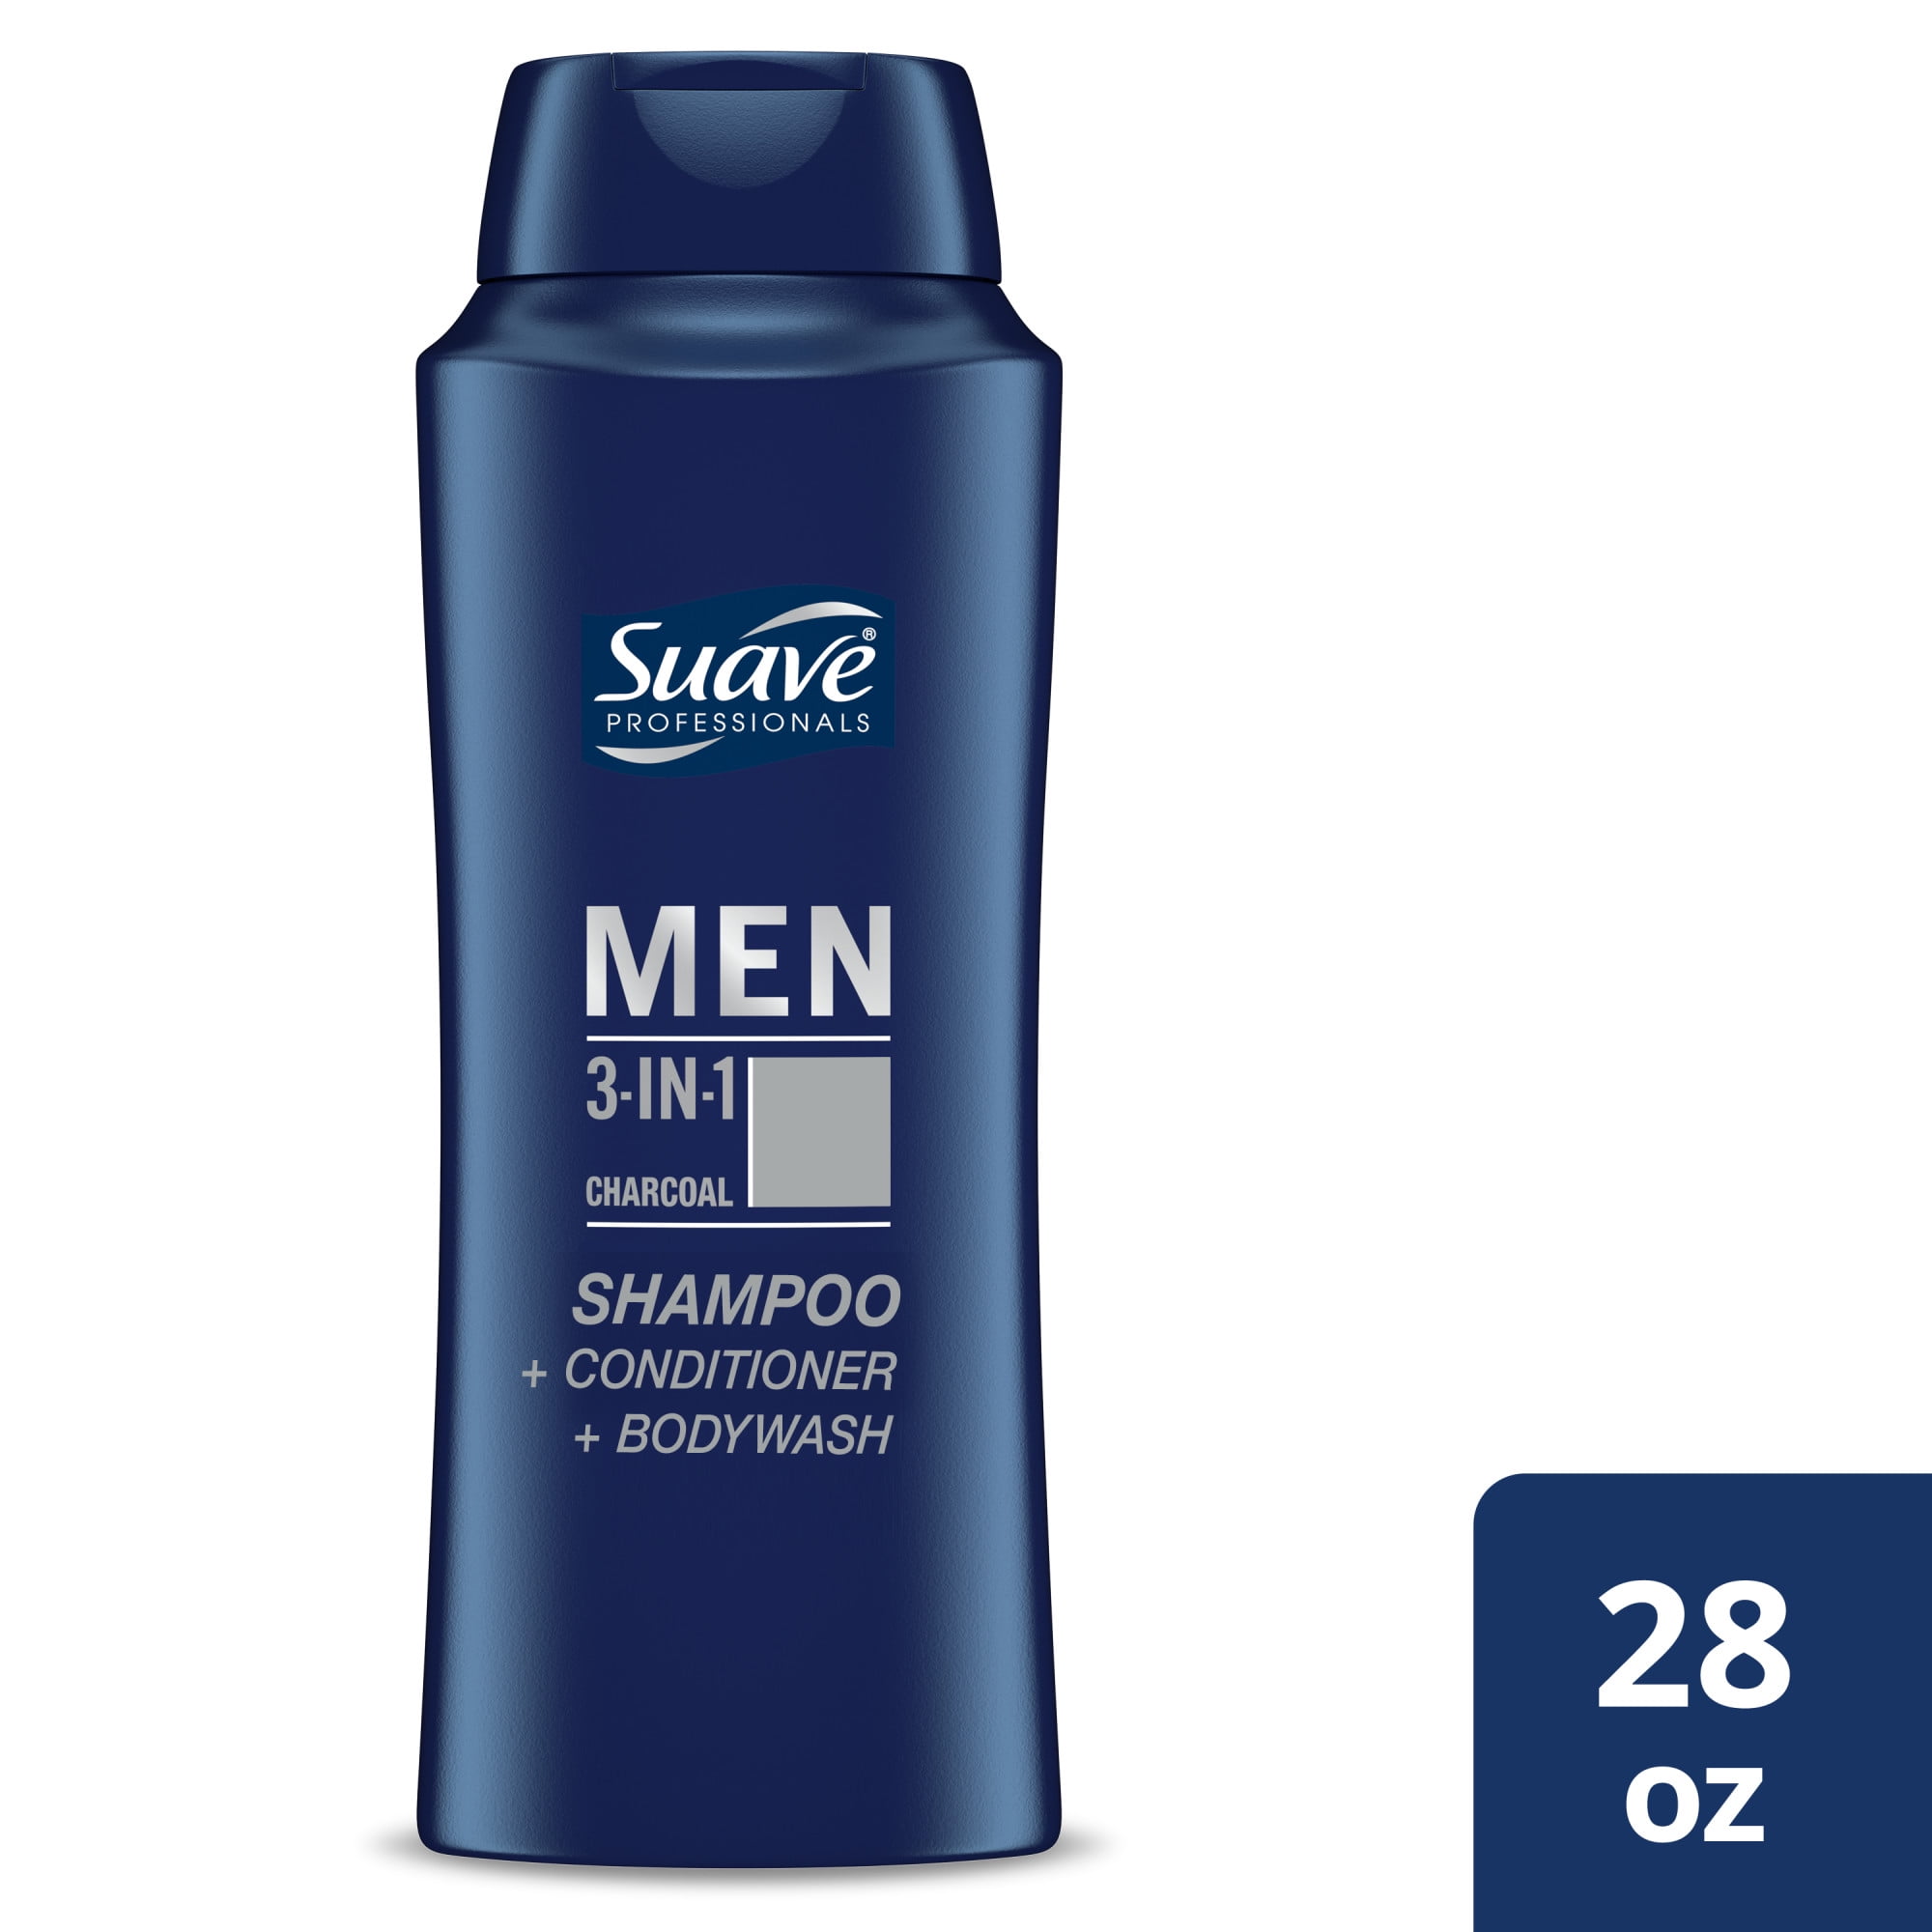 dialekt areal Valg Suave Professionals 3-in-1 Shampoo, Conditioner & Body Wash for Men with  Charcoal, 28 fl oz - Walmart.com